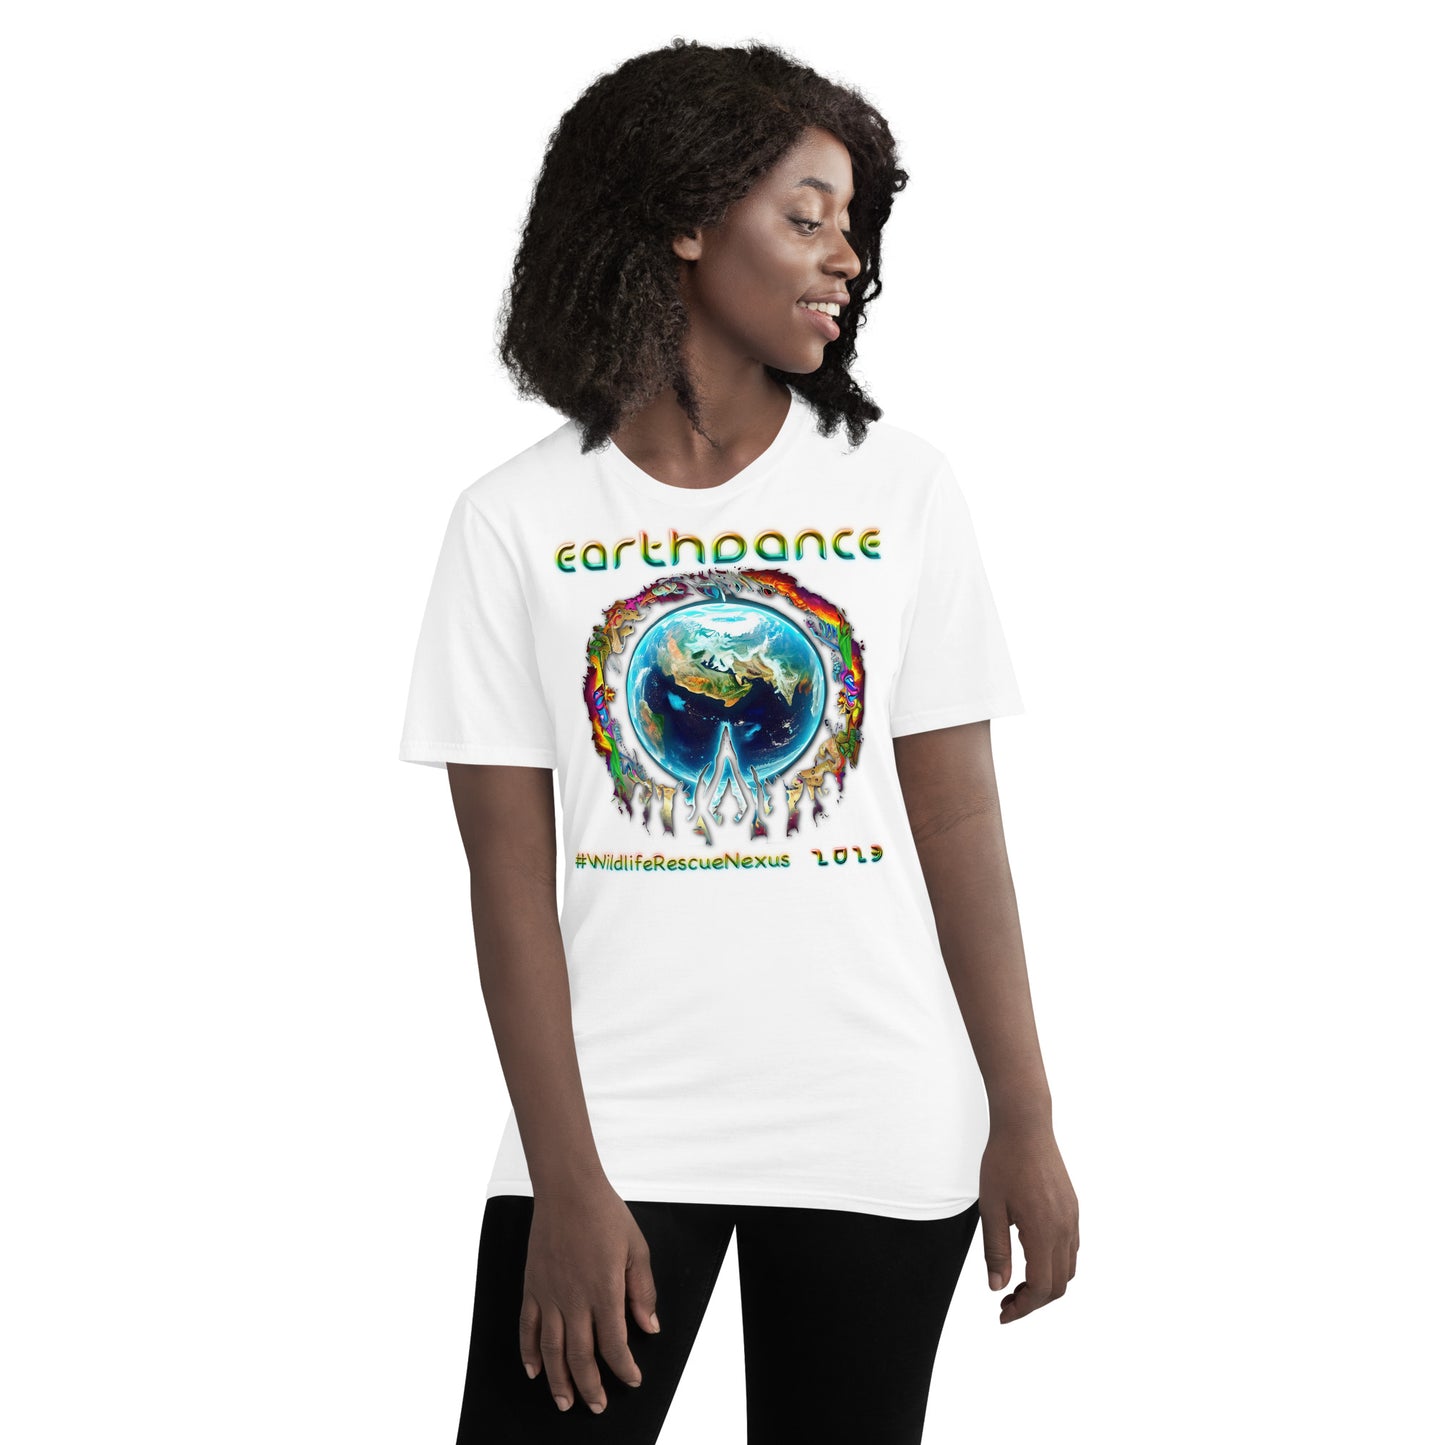 Earthdance 2023 - Amber Jane v1 - Limited Edition - Short-Sleeve T-Shirt - The Foundation of Families